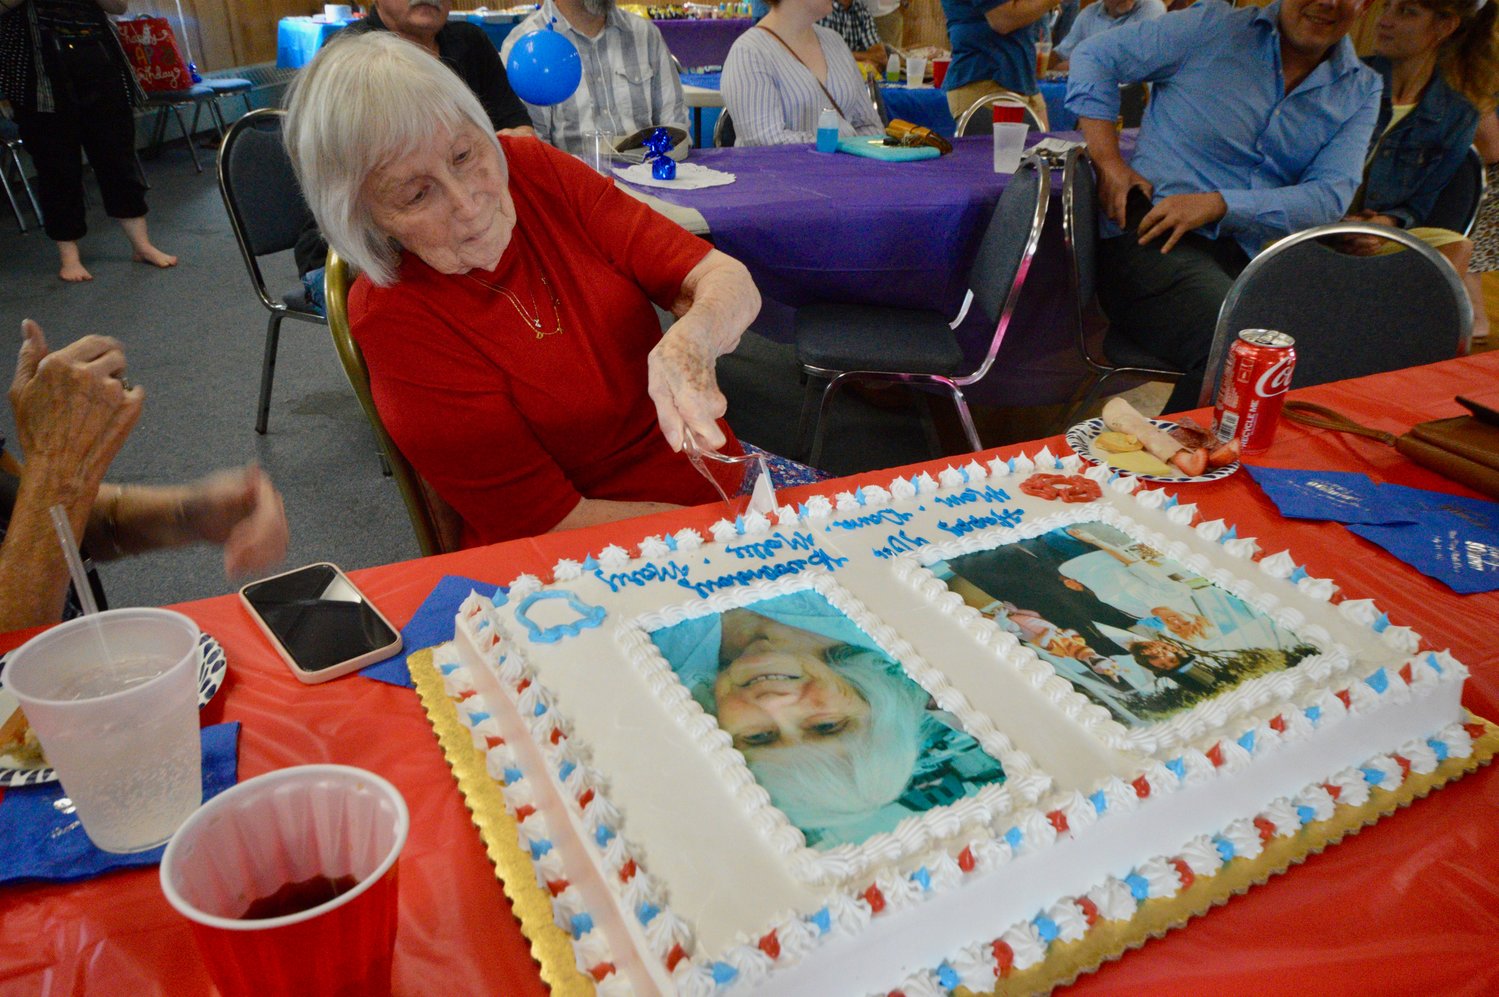 Mary Martin slices the first piece of cake at her birthday party inside the FOP Lodge.